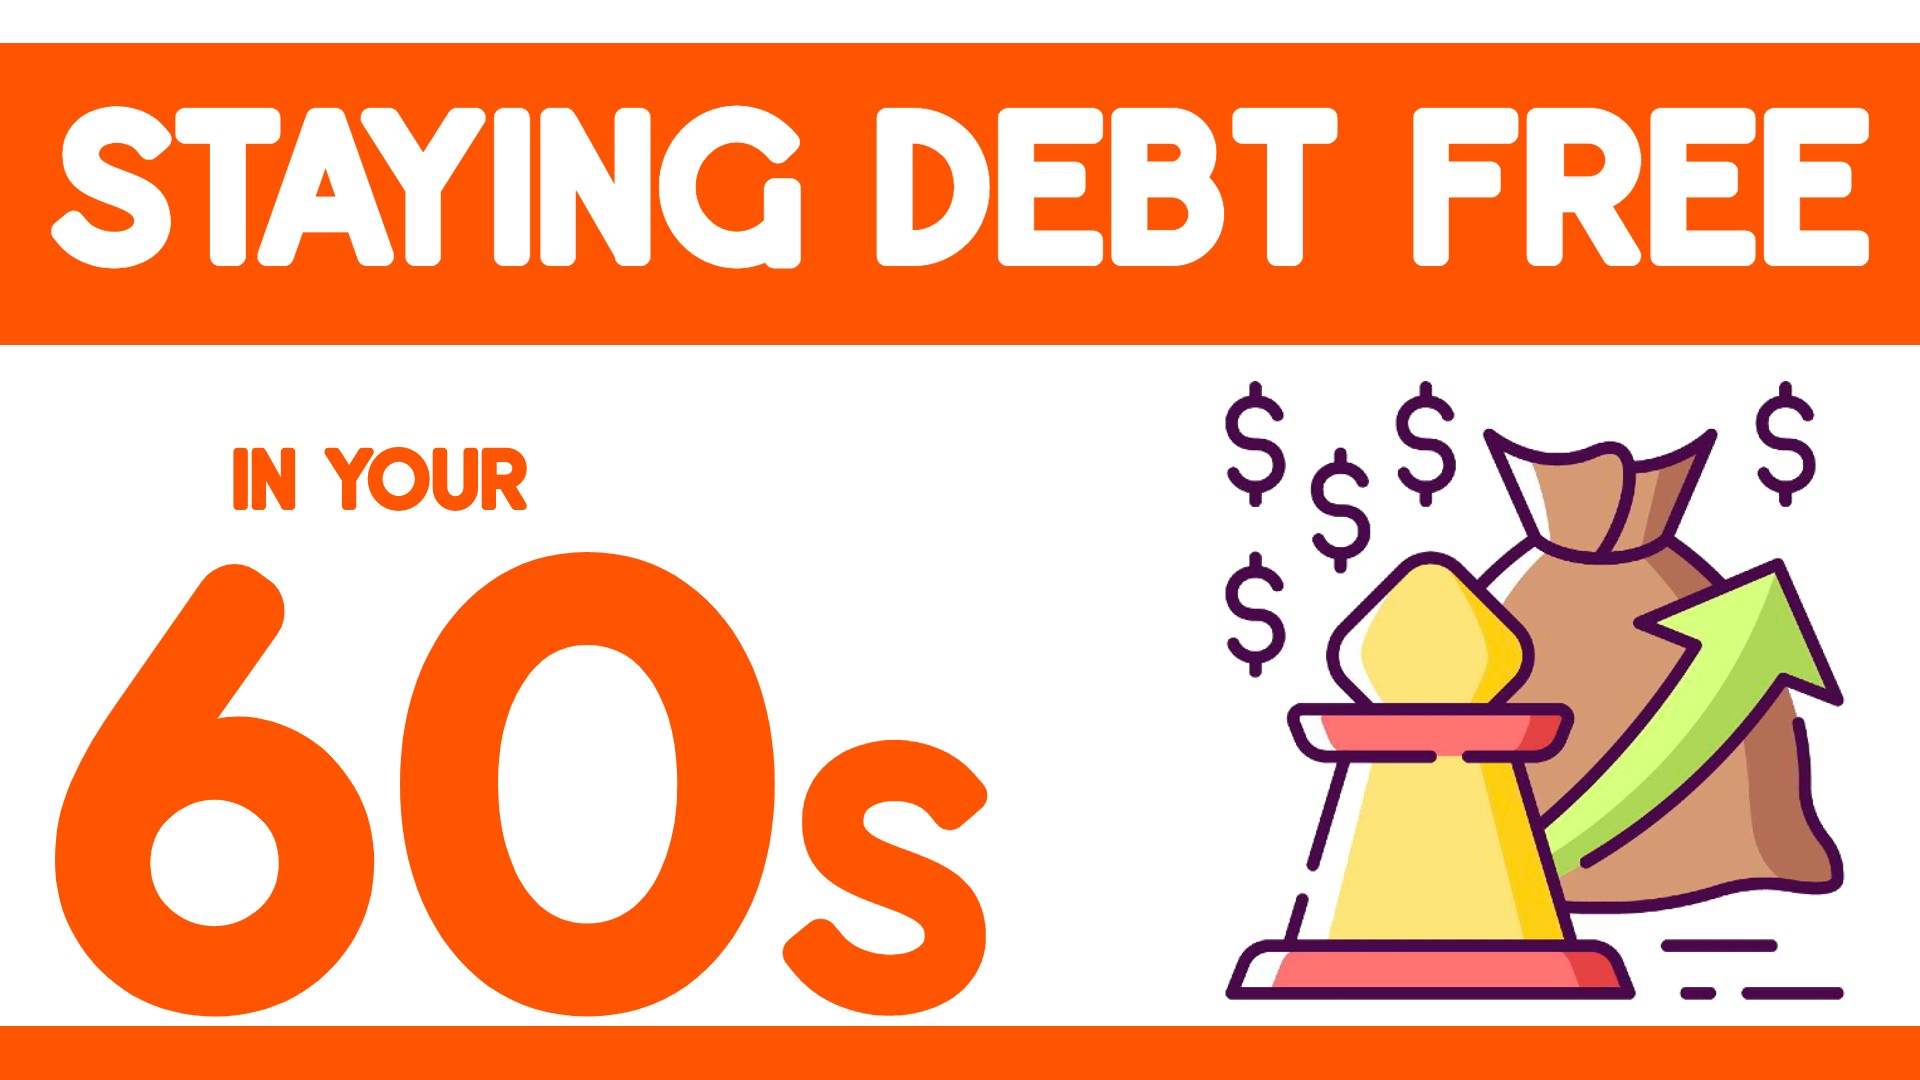 Staying Debt-Free in Your 60s